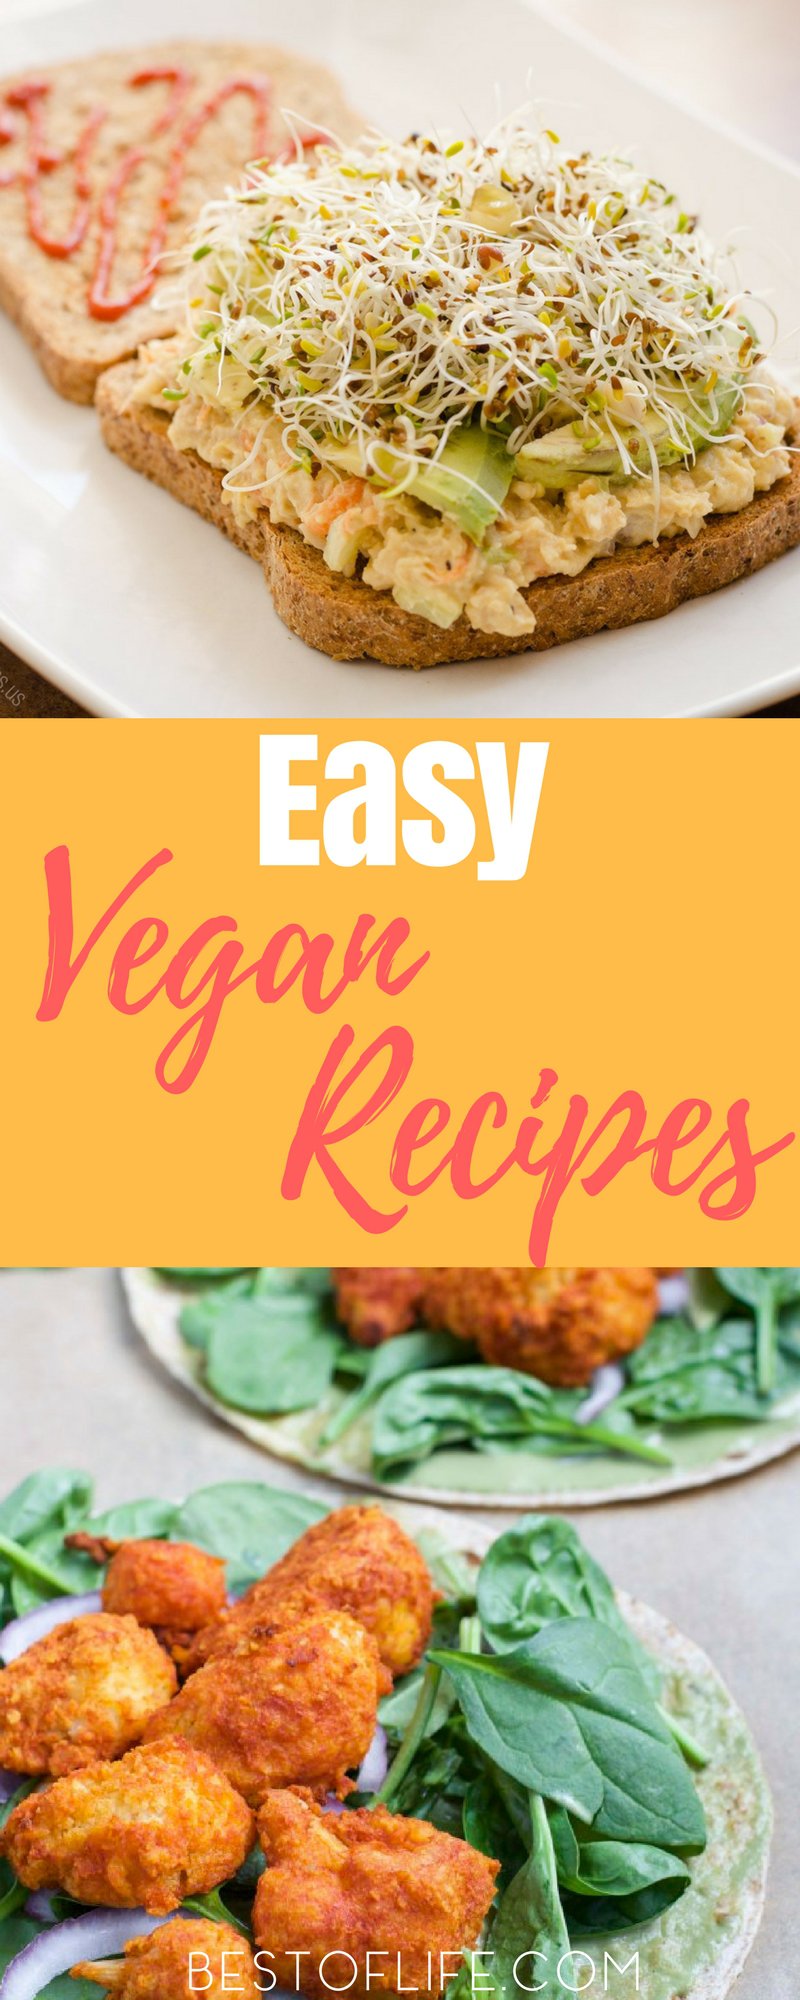 Easy vegan recipes can help you become or even stay a vegan without feeling like you’re missing out on something delicious. Best Vegan Recipes | Vegan Recipes for Beginners | How to Become a Vegan | Quick Vegan Recipes | Healthy Recipe without Meat | Meatless Recipes | Easy Recipes with Vegetables